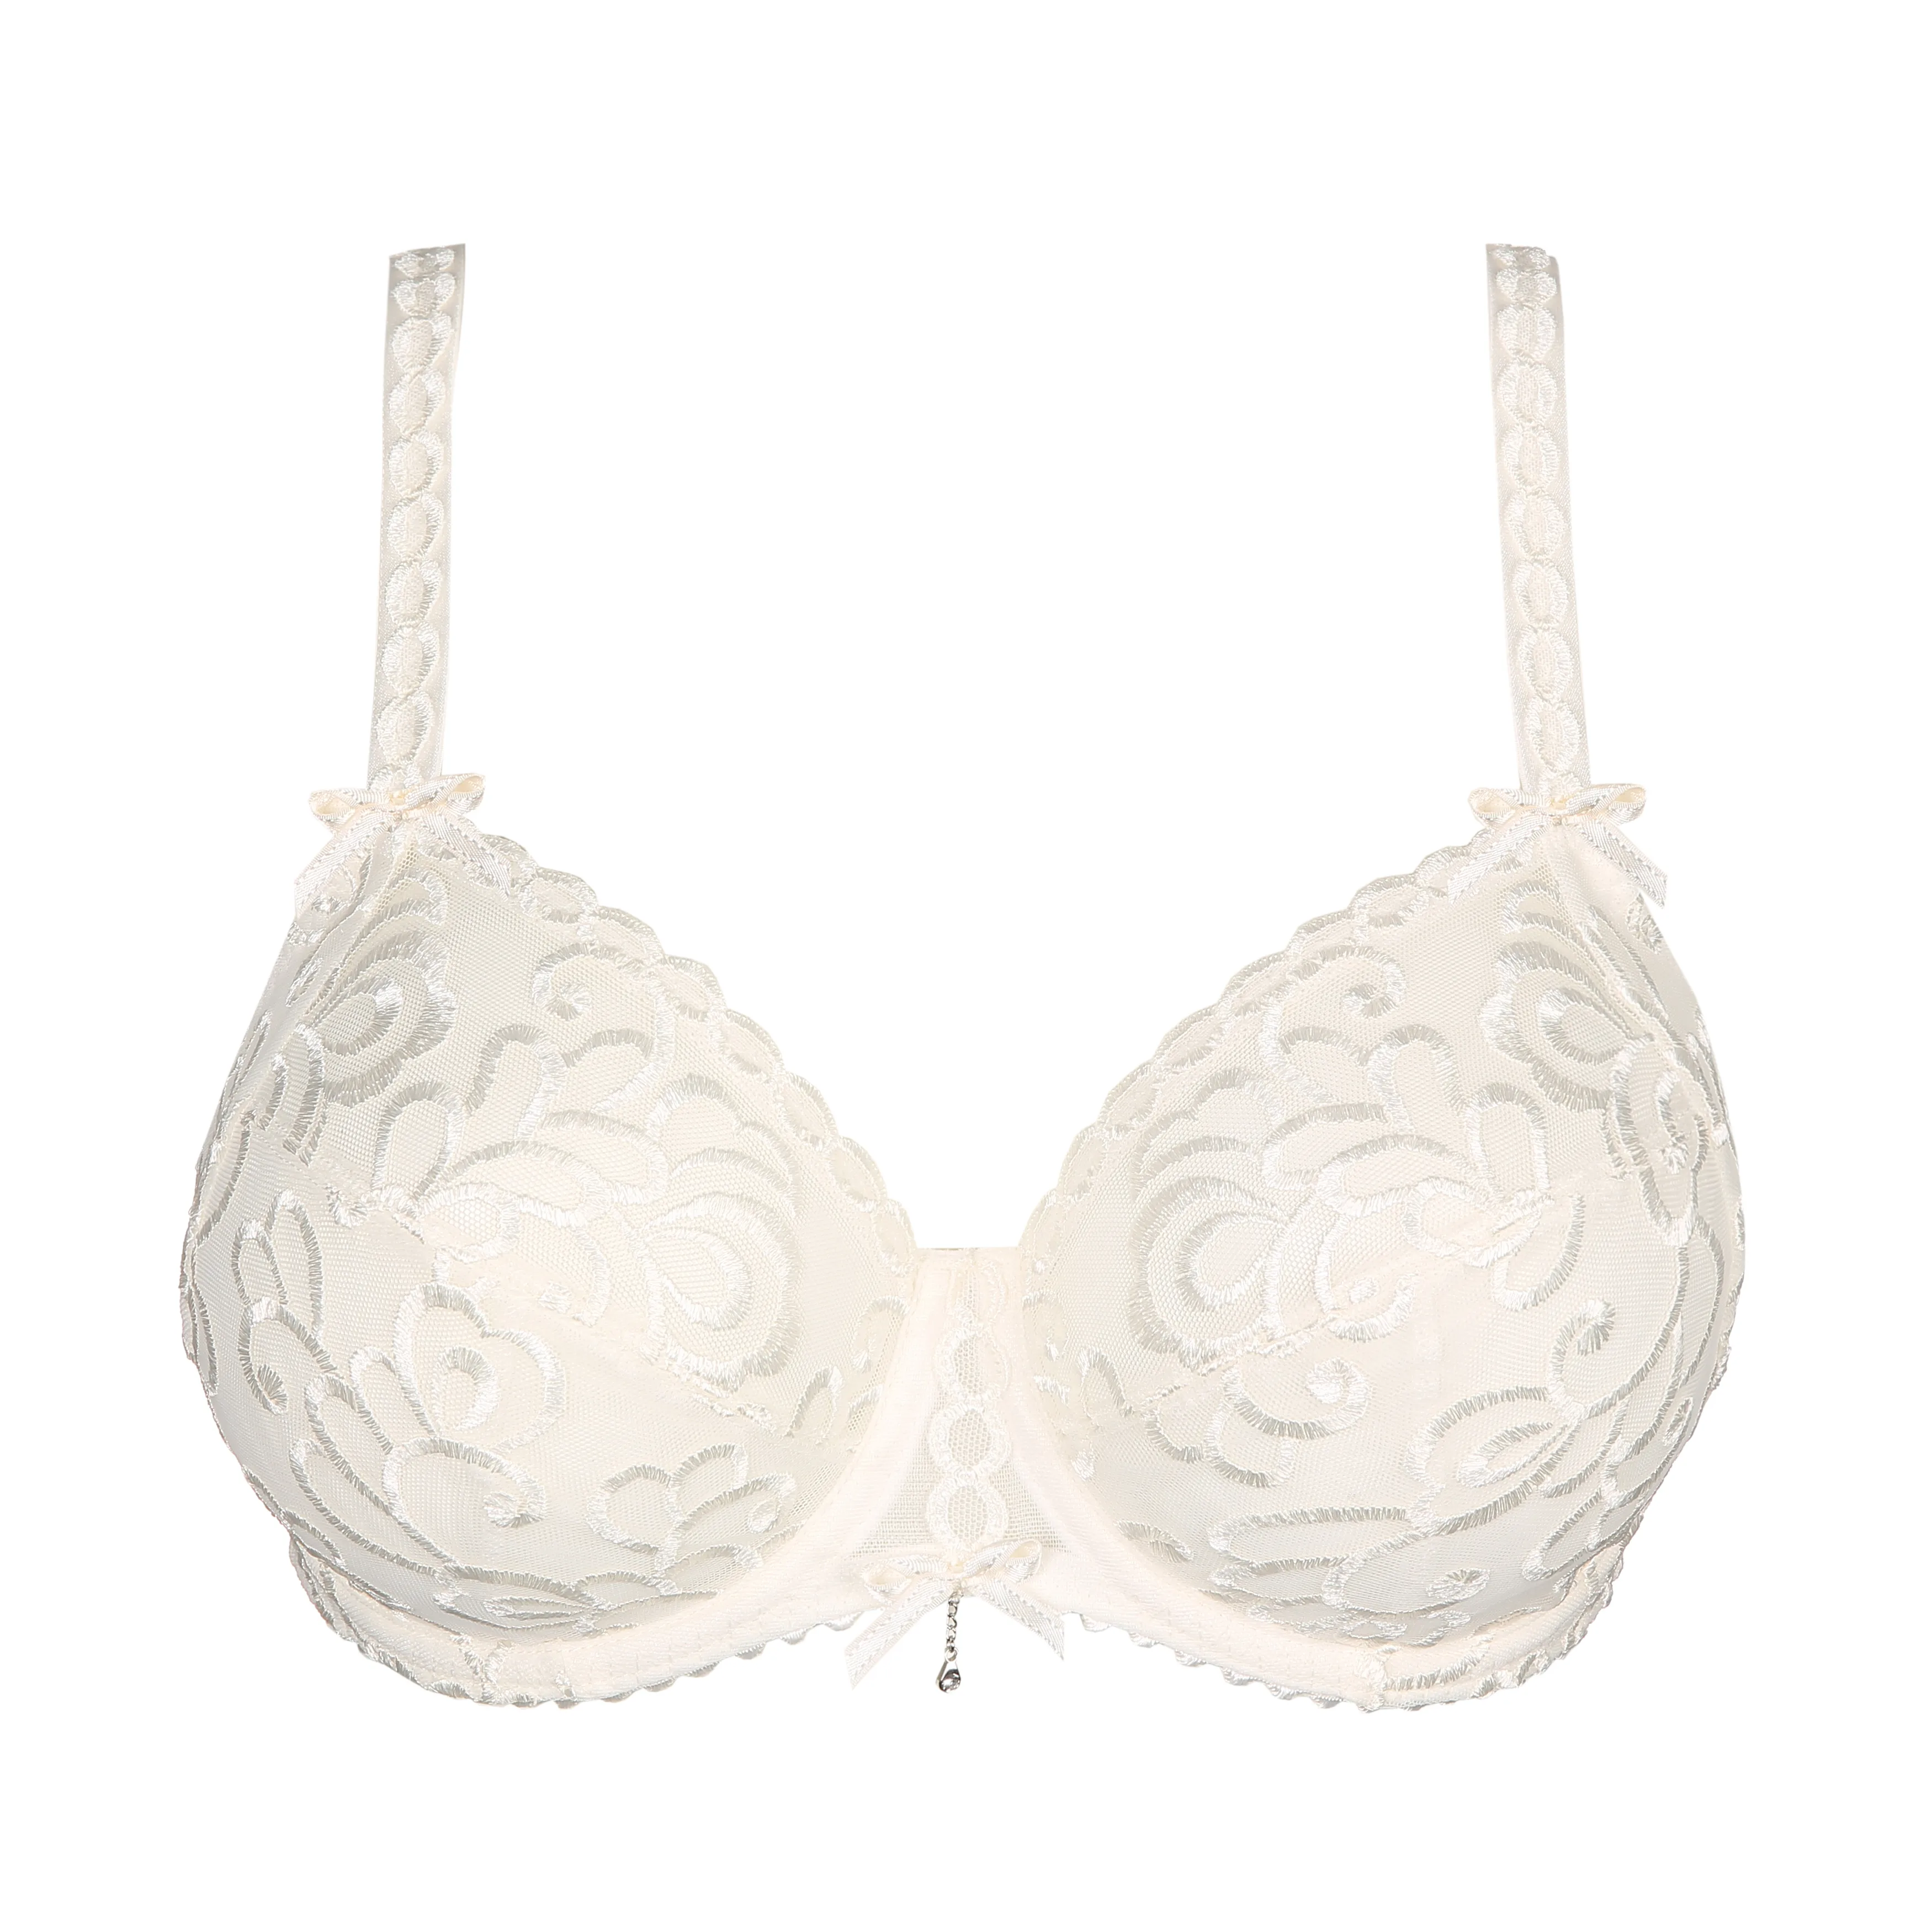 PrimaDonna 34G Hyde Park Bra Full Cup Three Section India